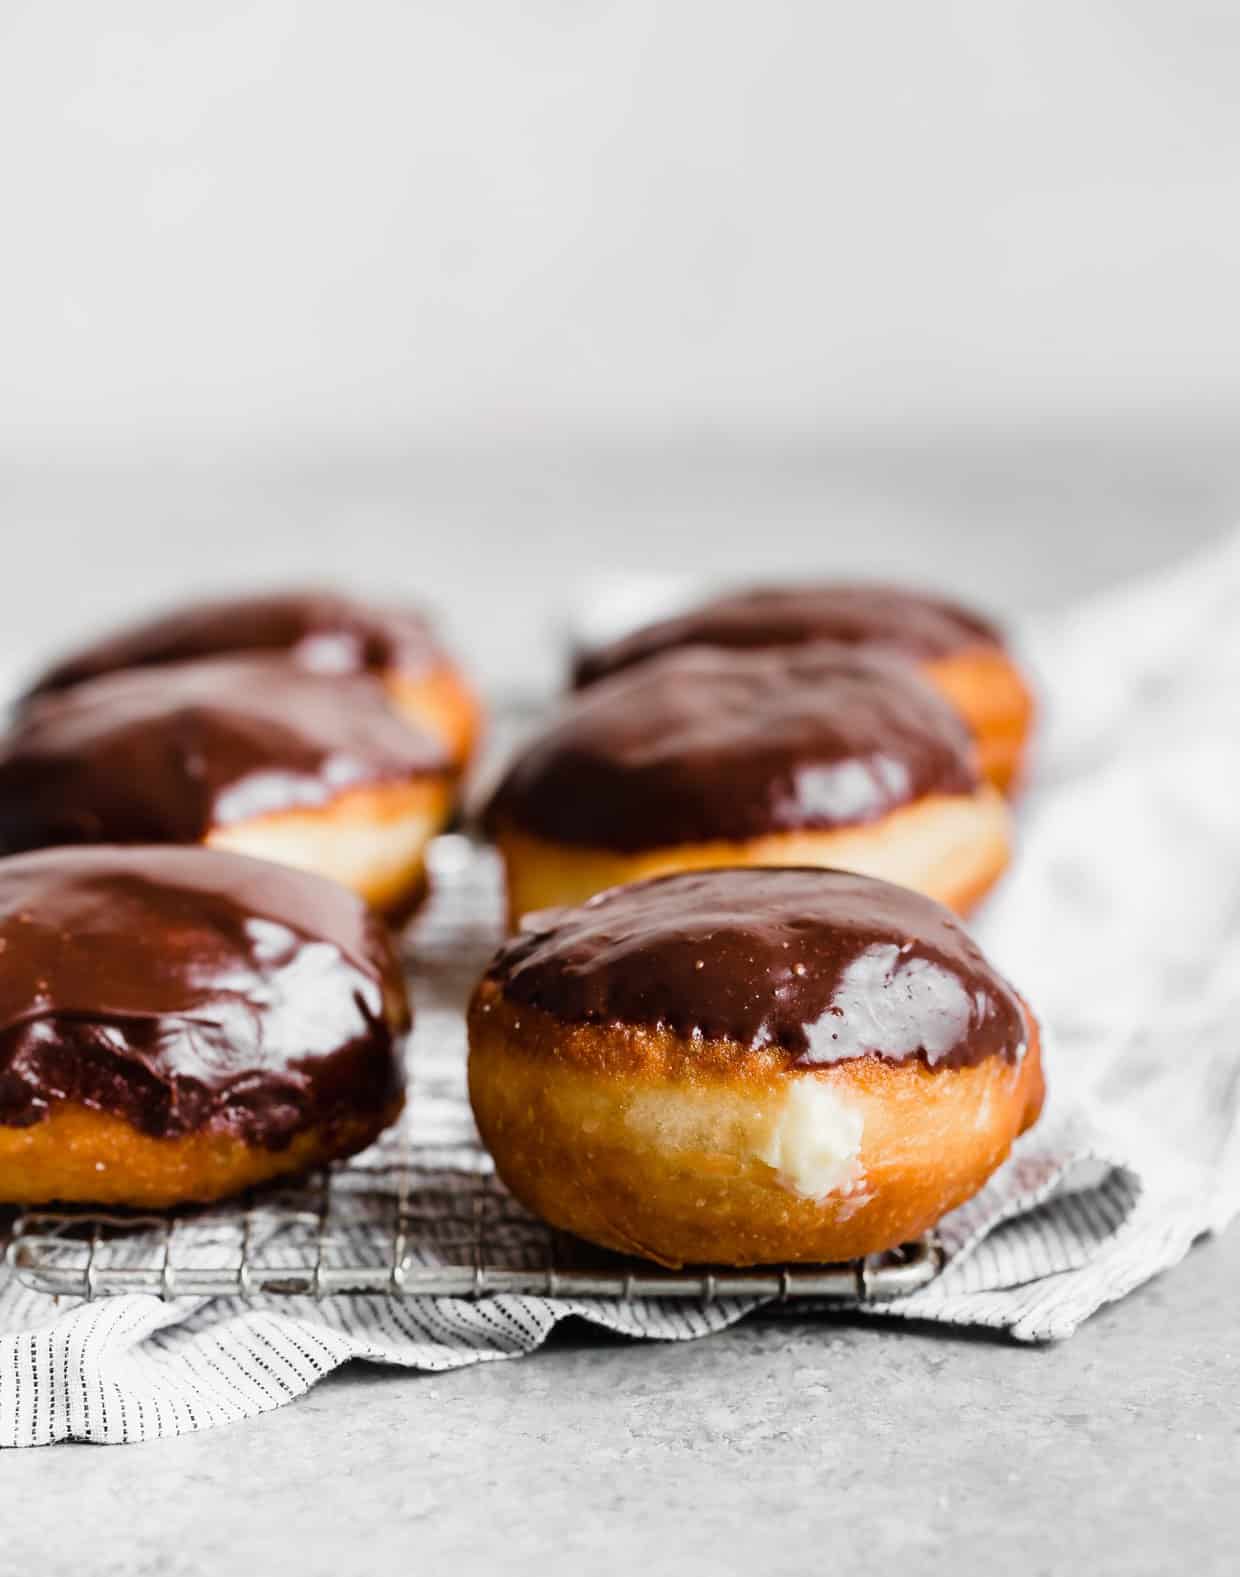 Pastry cream filled Boston Cream Donuts on a wire rack on a grey background.